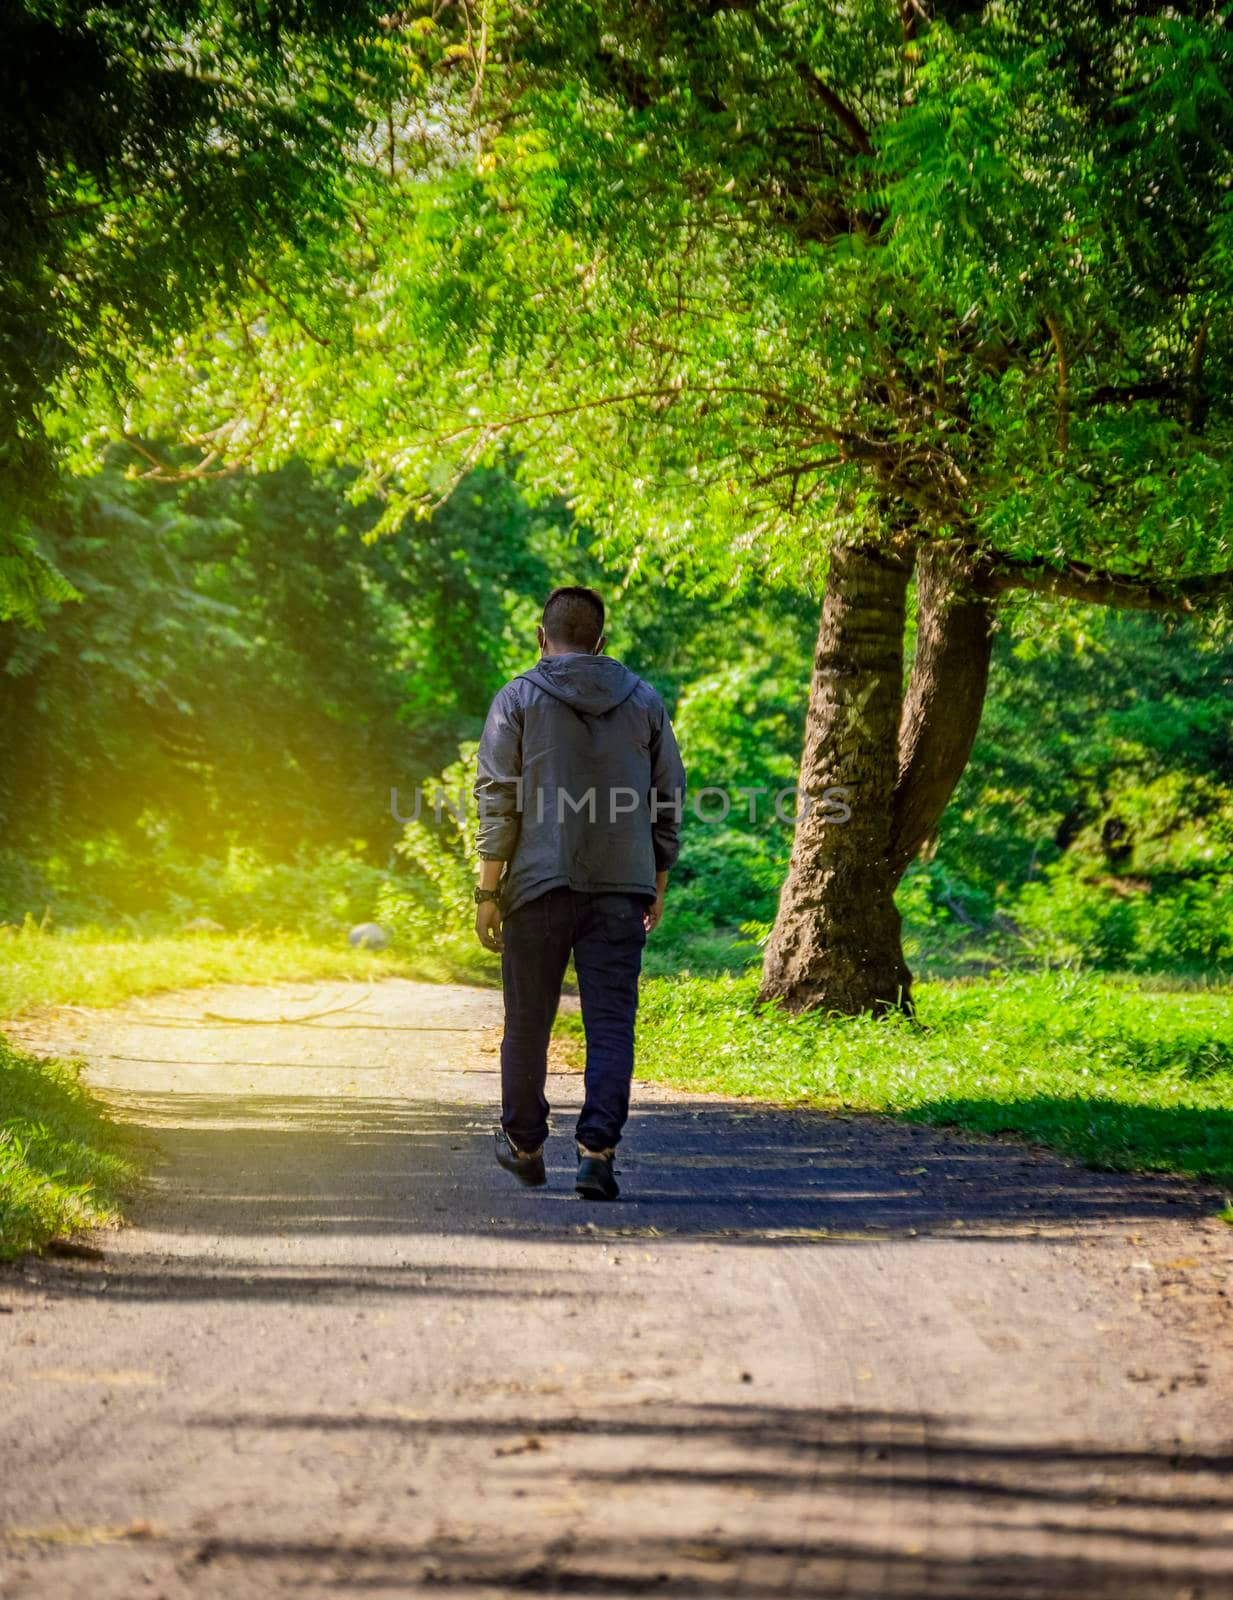 Latin man walking on a nice road, rear view of a young man walking on a road surrounded by trees by isaiphoto